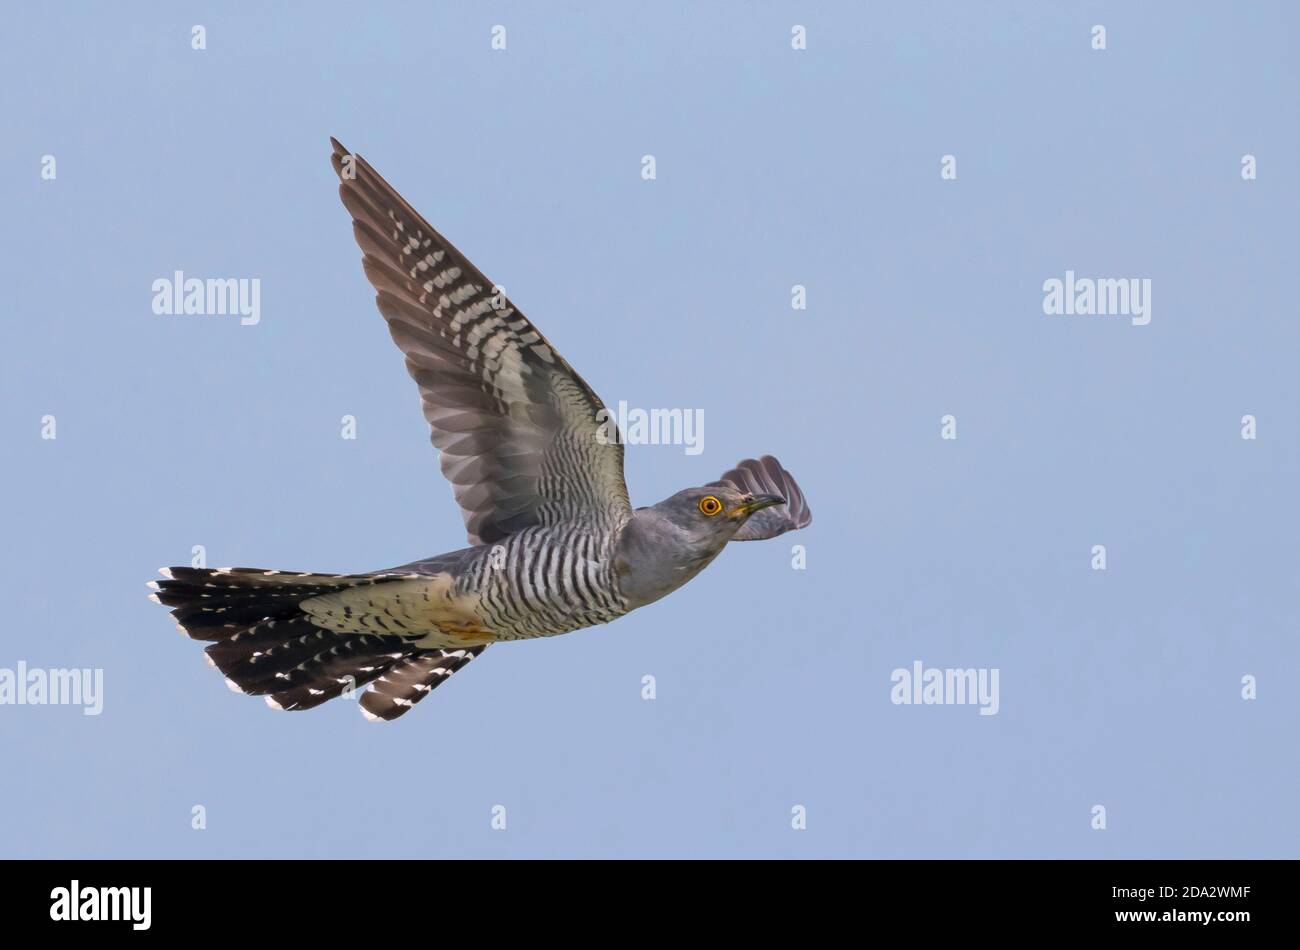 Eurasian cuckoo (Cuculus canorus), male in flight, seen from the side, showing under wing pattern, Italy, Piana fiorentina Stock Photo